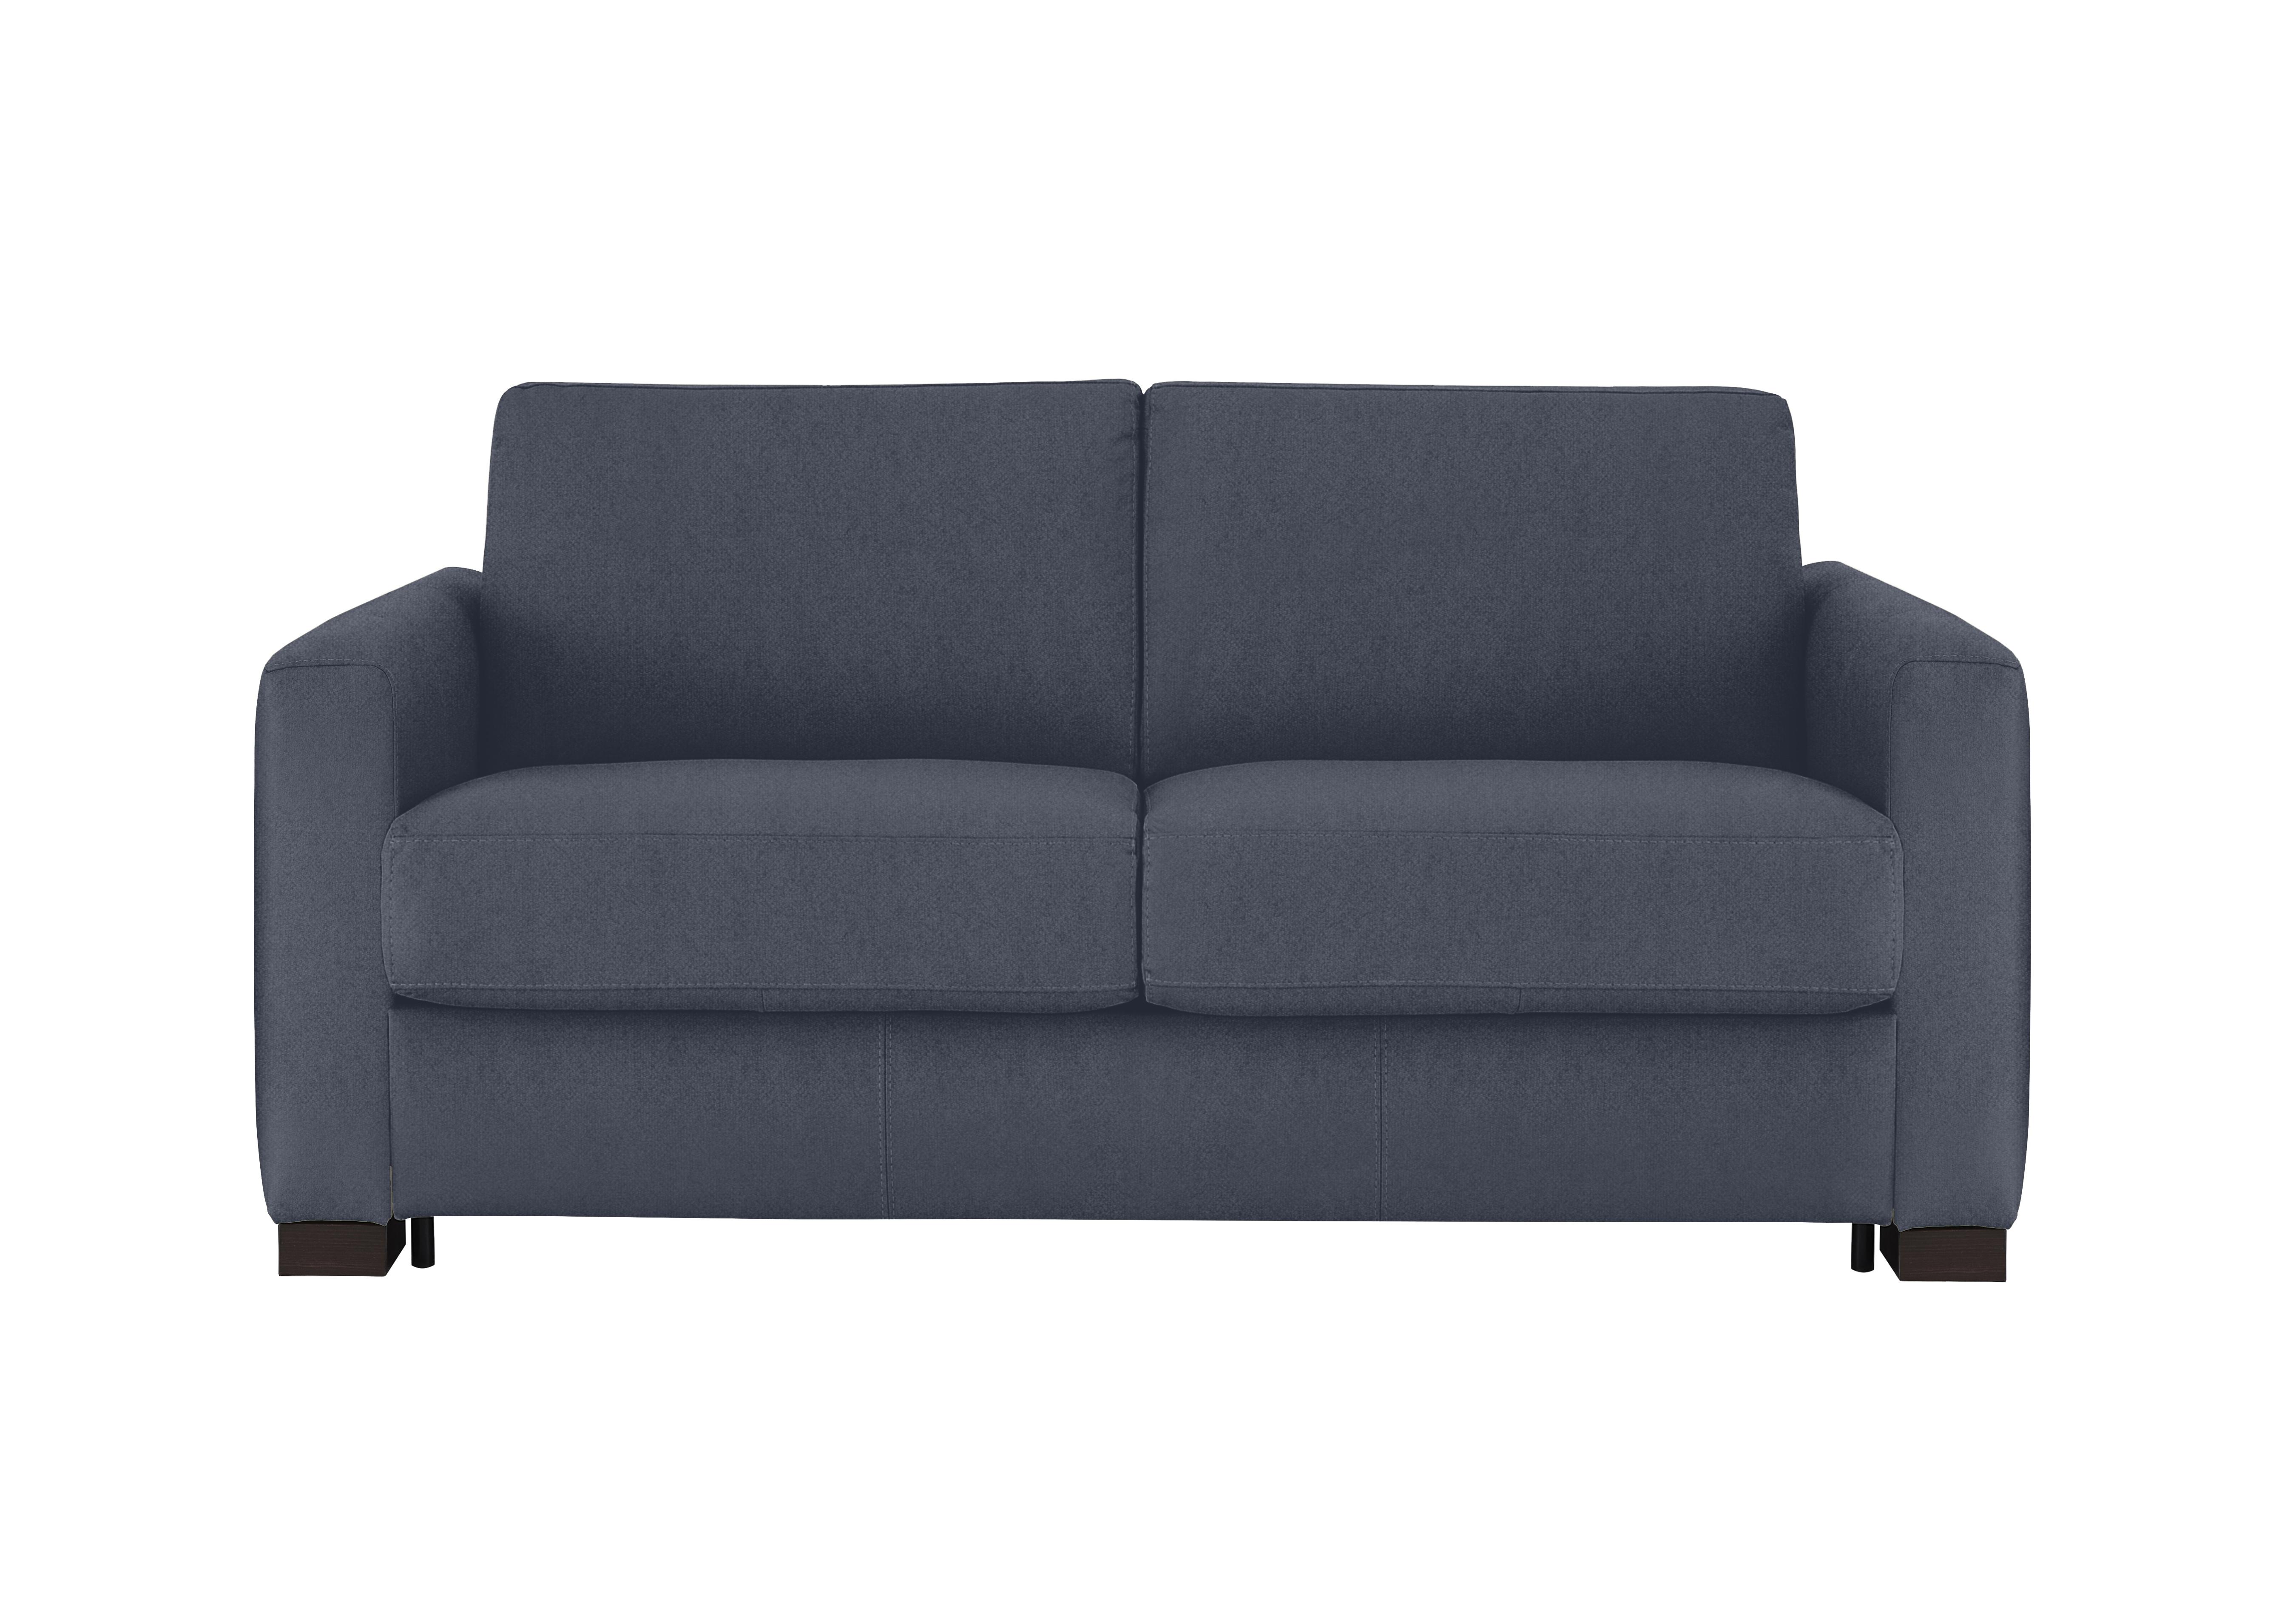 Alcova 2 Seater Fabric Sofa Bed with Box Arms in Fuente Ocean on Furniture Village